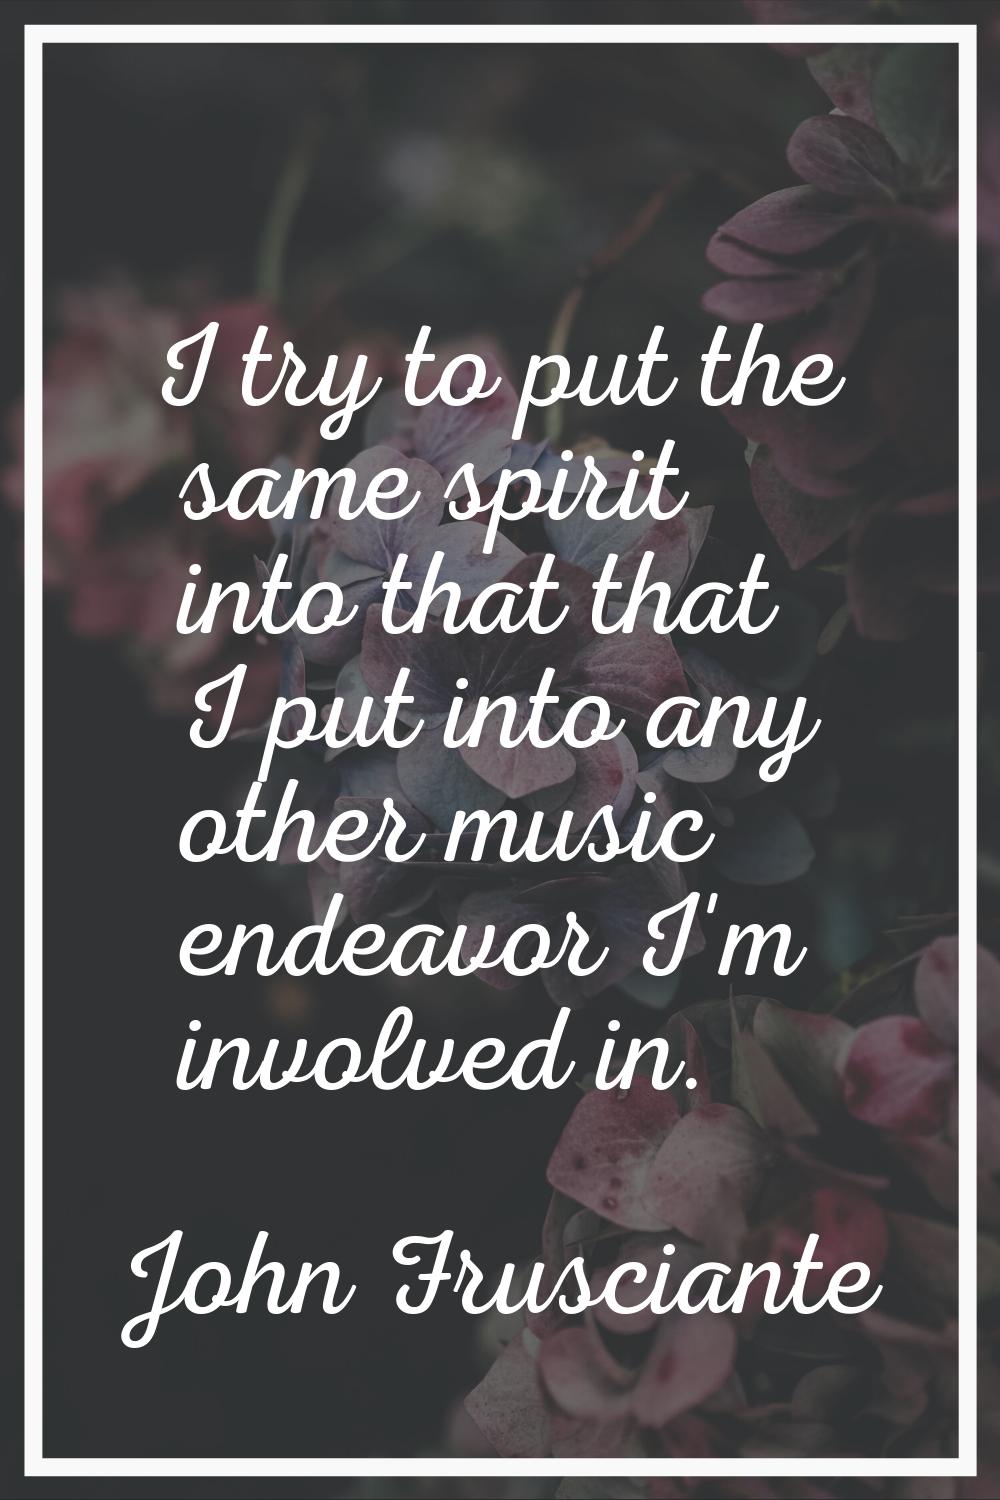 I try to put the same spirit into that that I put into any other music endeavor I'm involved in.